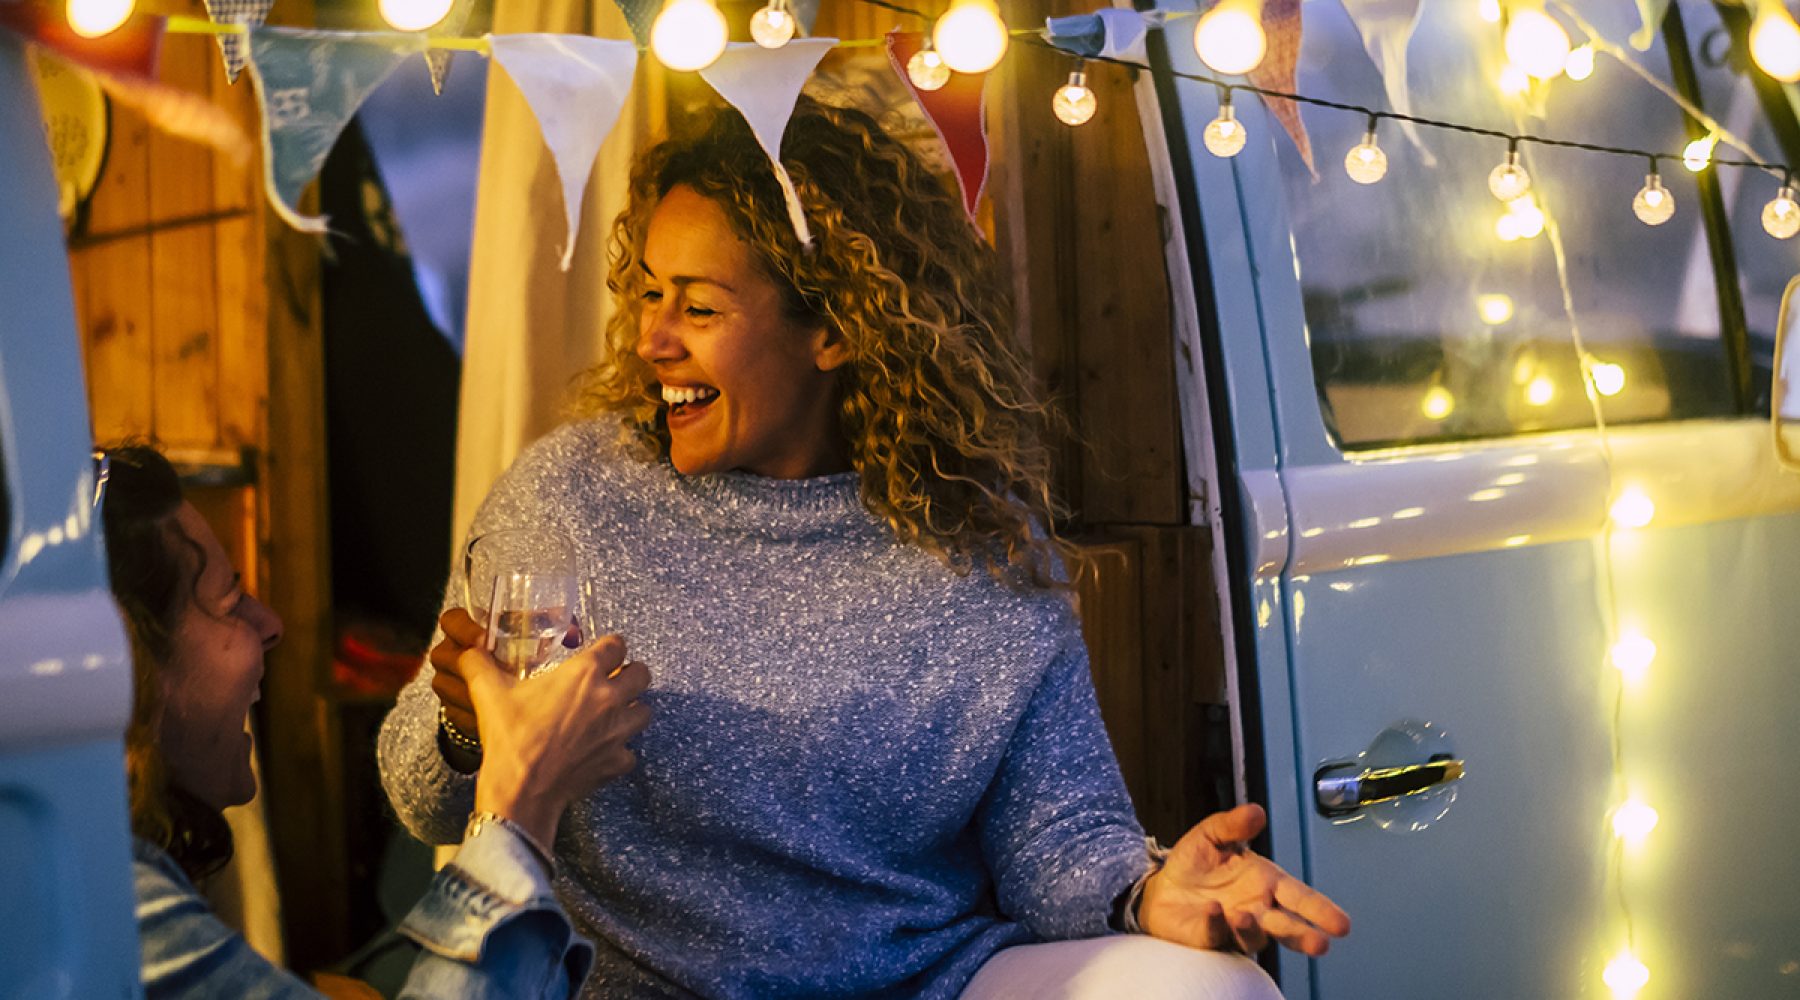 Alternative travel and celebration concept with couple of people adult cheerful happy women celebrate together in a vintage van camper  and party lights outdoor